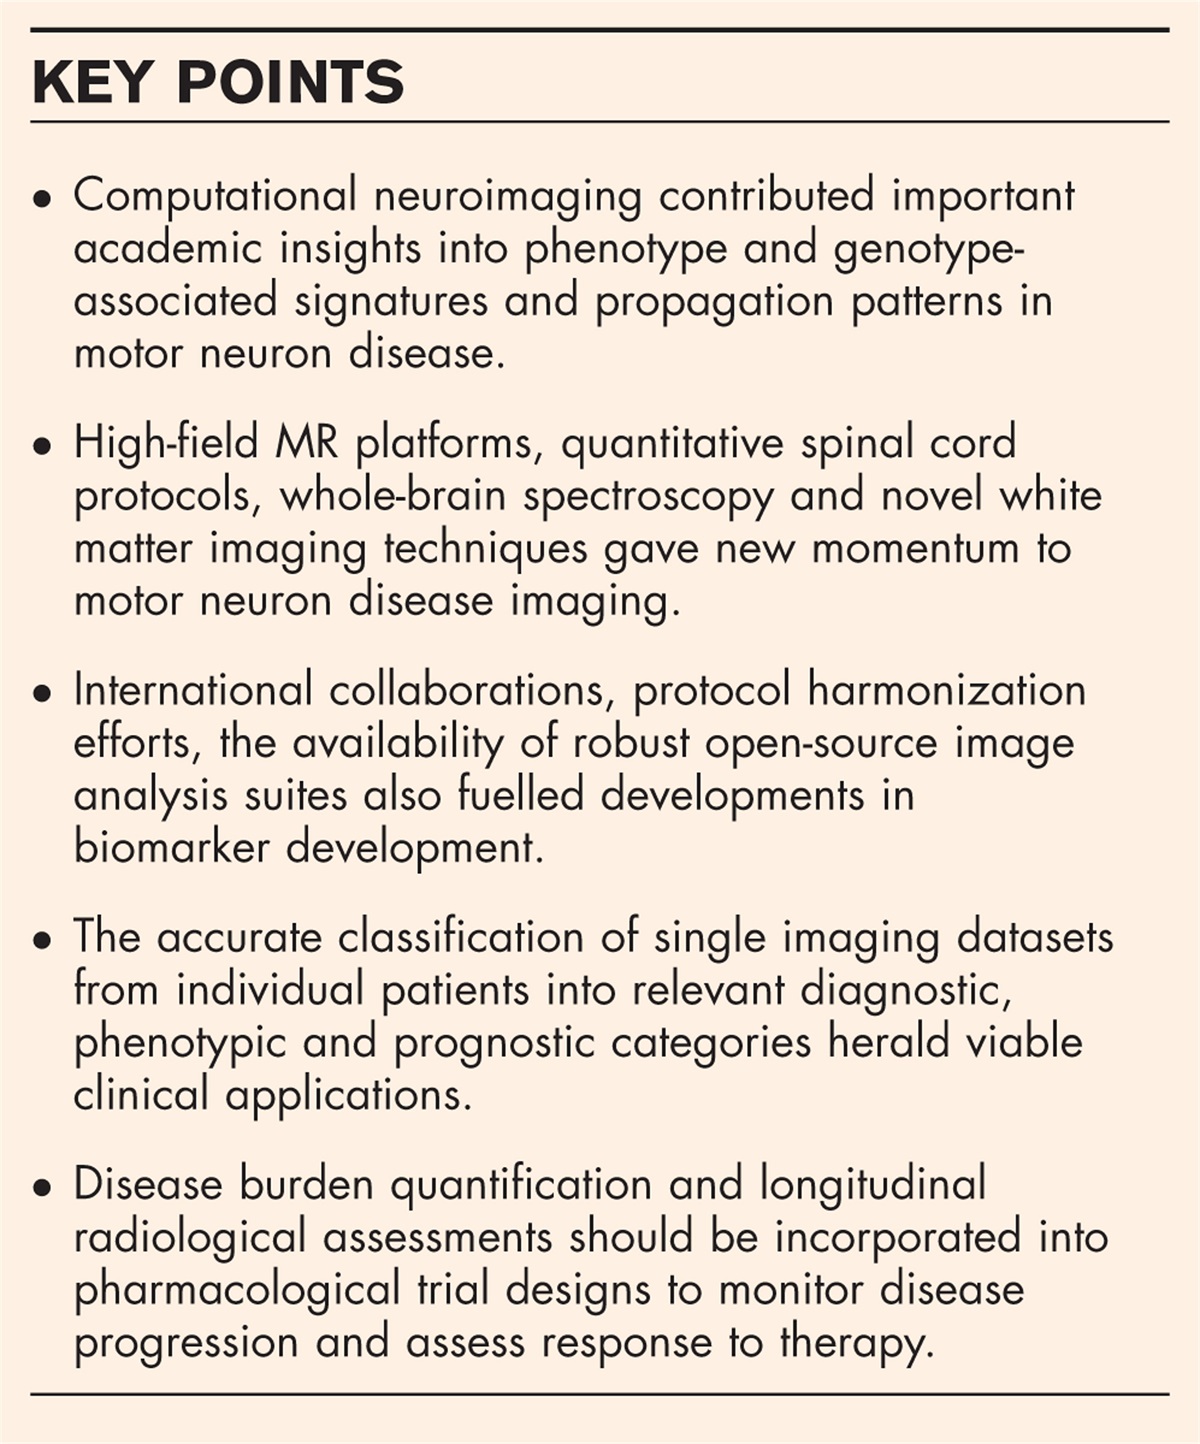 Promises and pitfalls of imaging-based biomarkers in motor neuron diseases